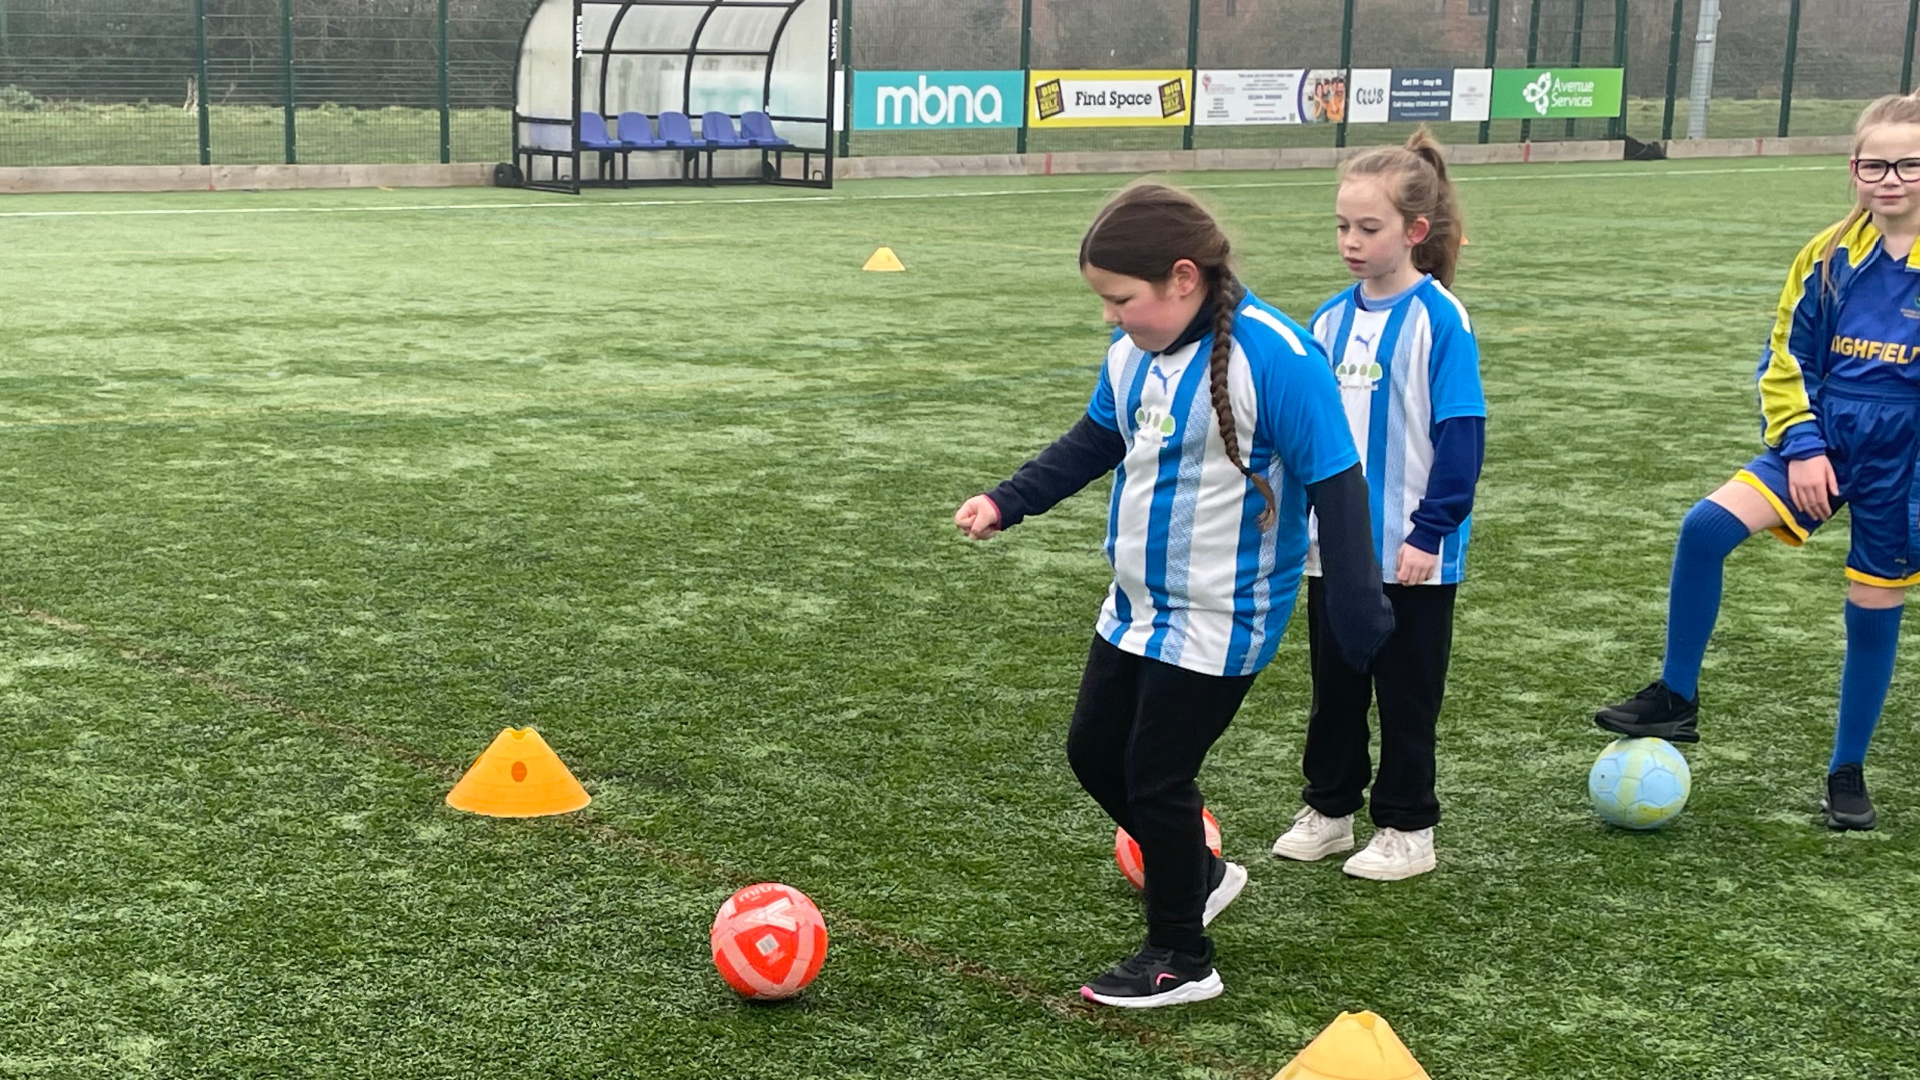 The Chester FC Community Trust #LetGirlsPlay event took place at the King George V Community Sports Hub in Blacon.